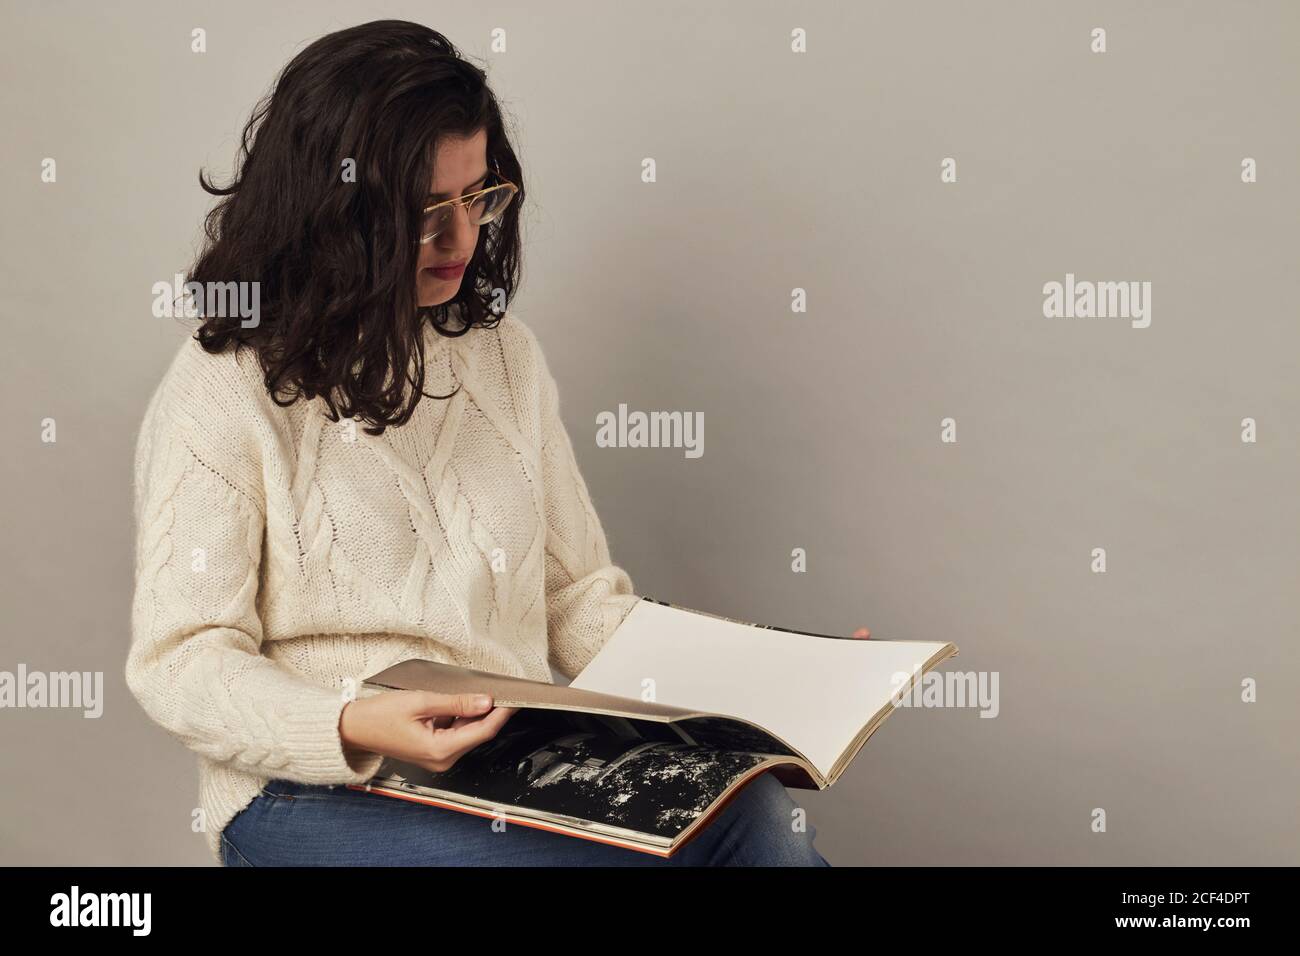 Serious youthful dark haired woman in glasses and white sweater looking through book while sitting in studio Stock Photo